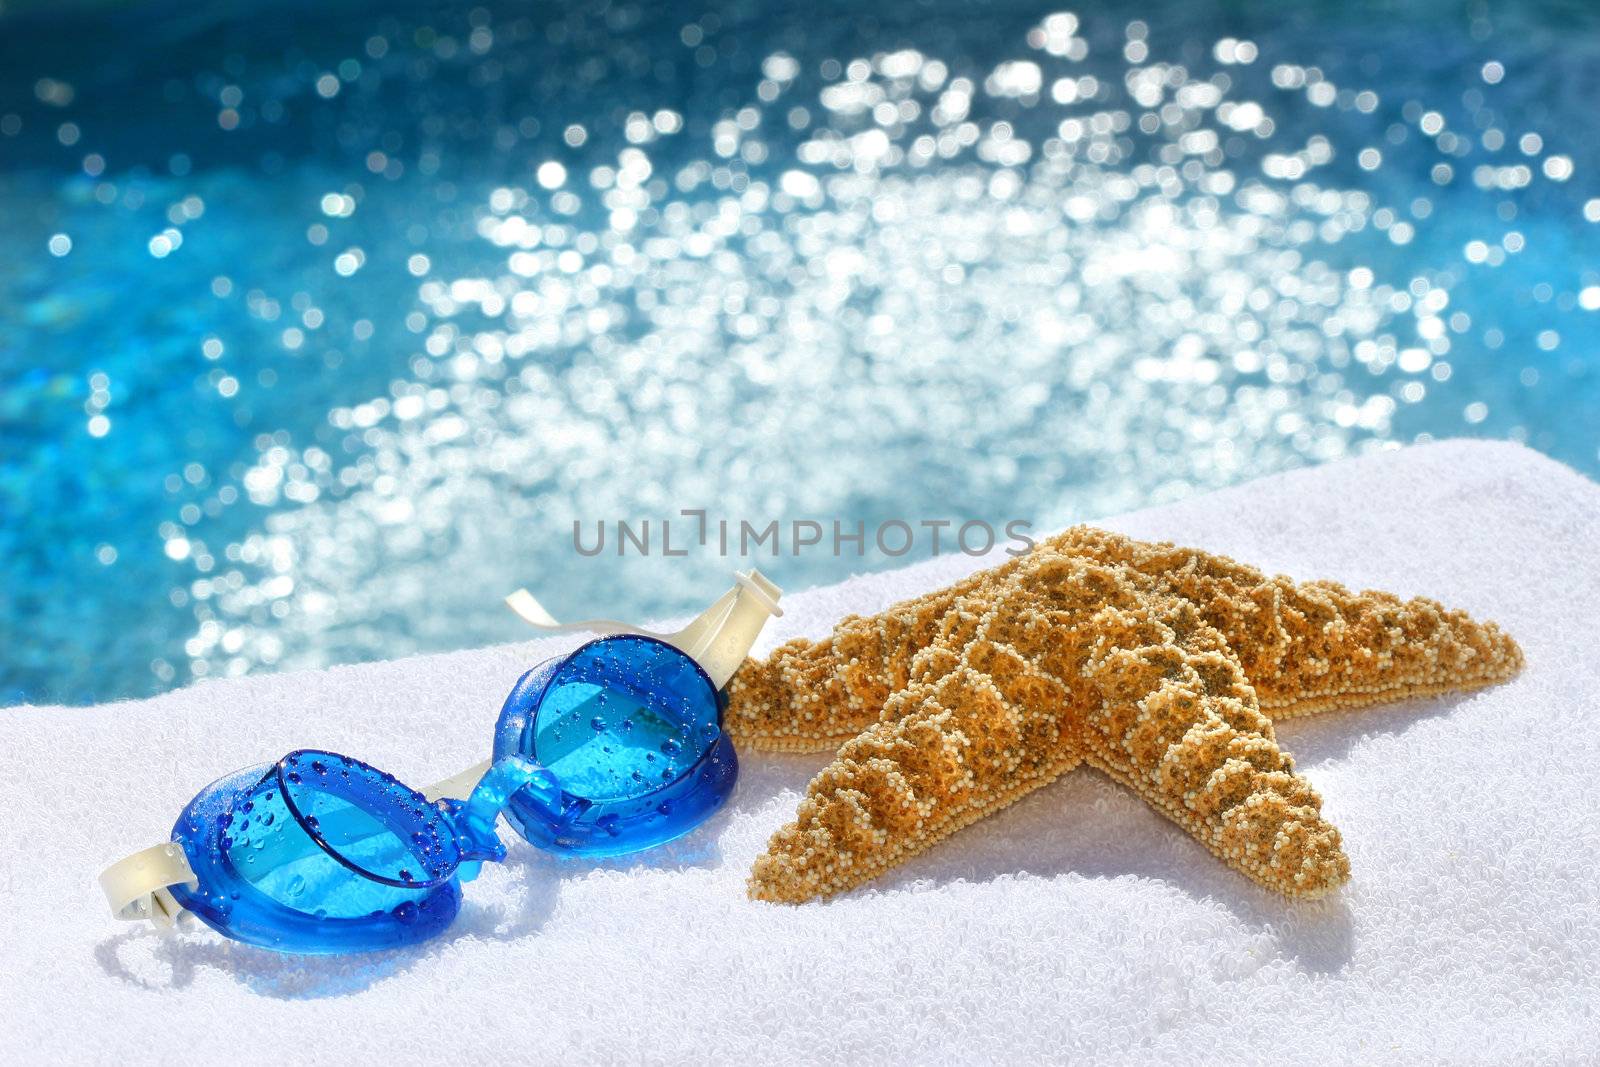 Under water goggles with starfish on a white towel